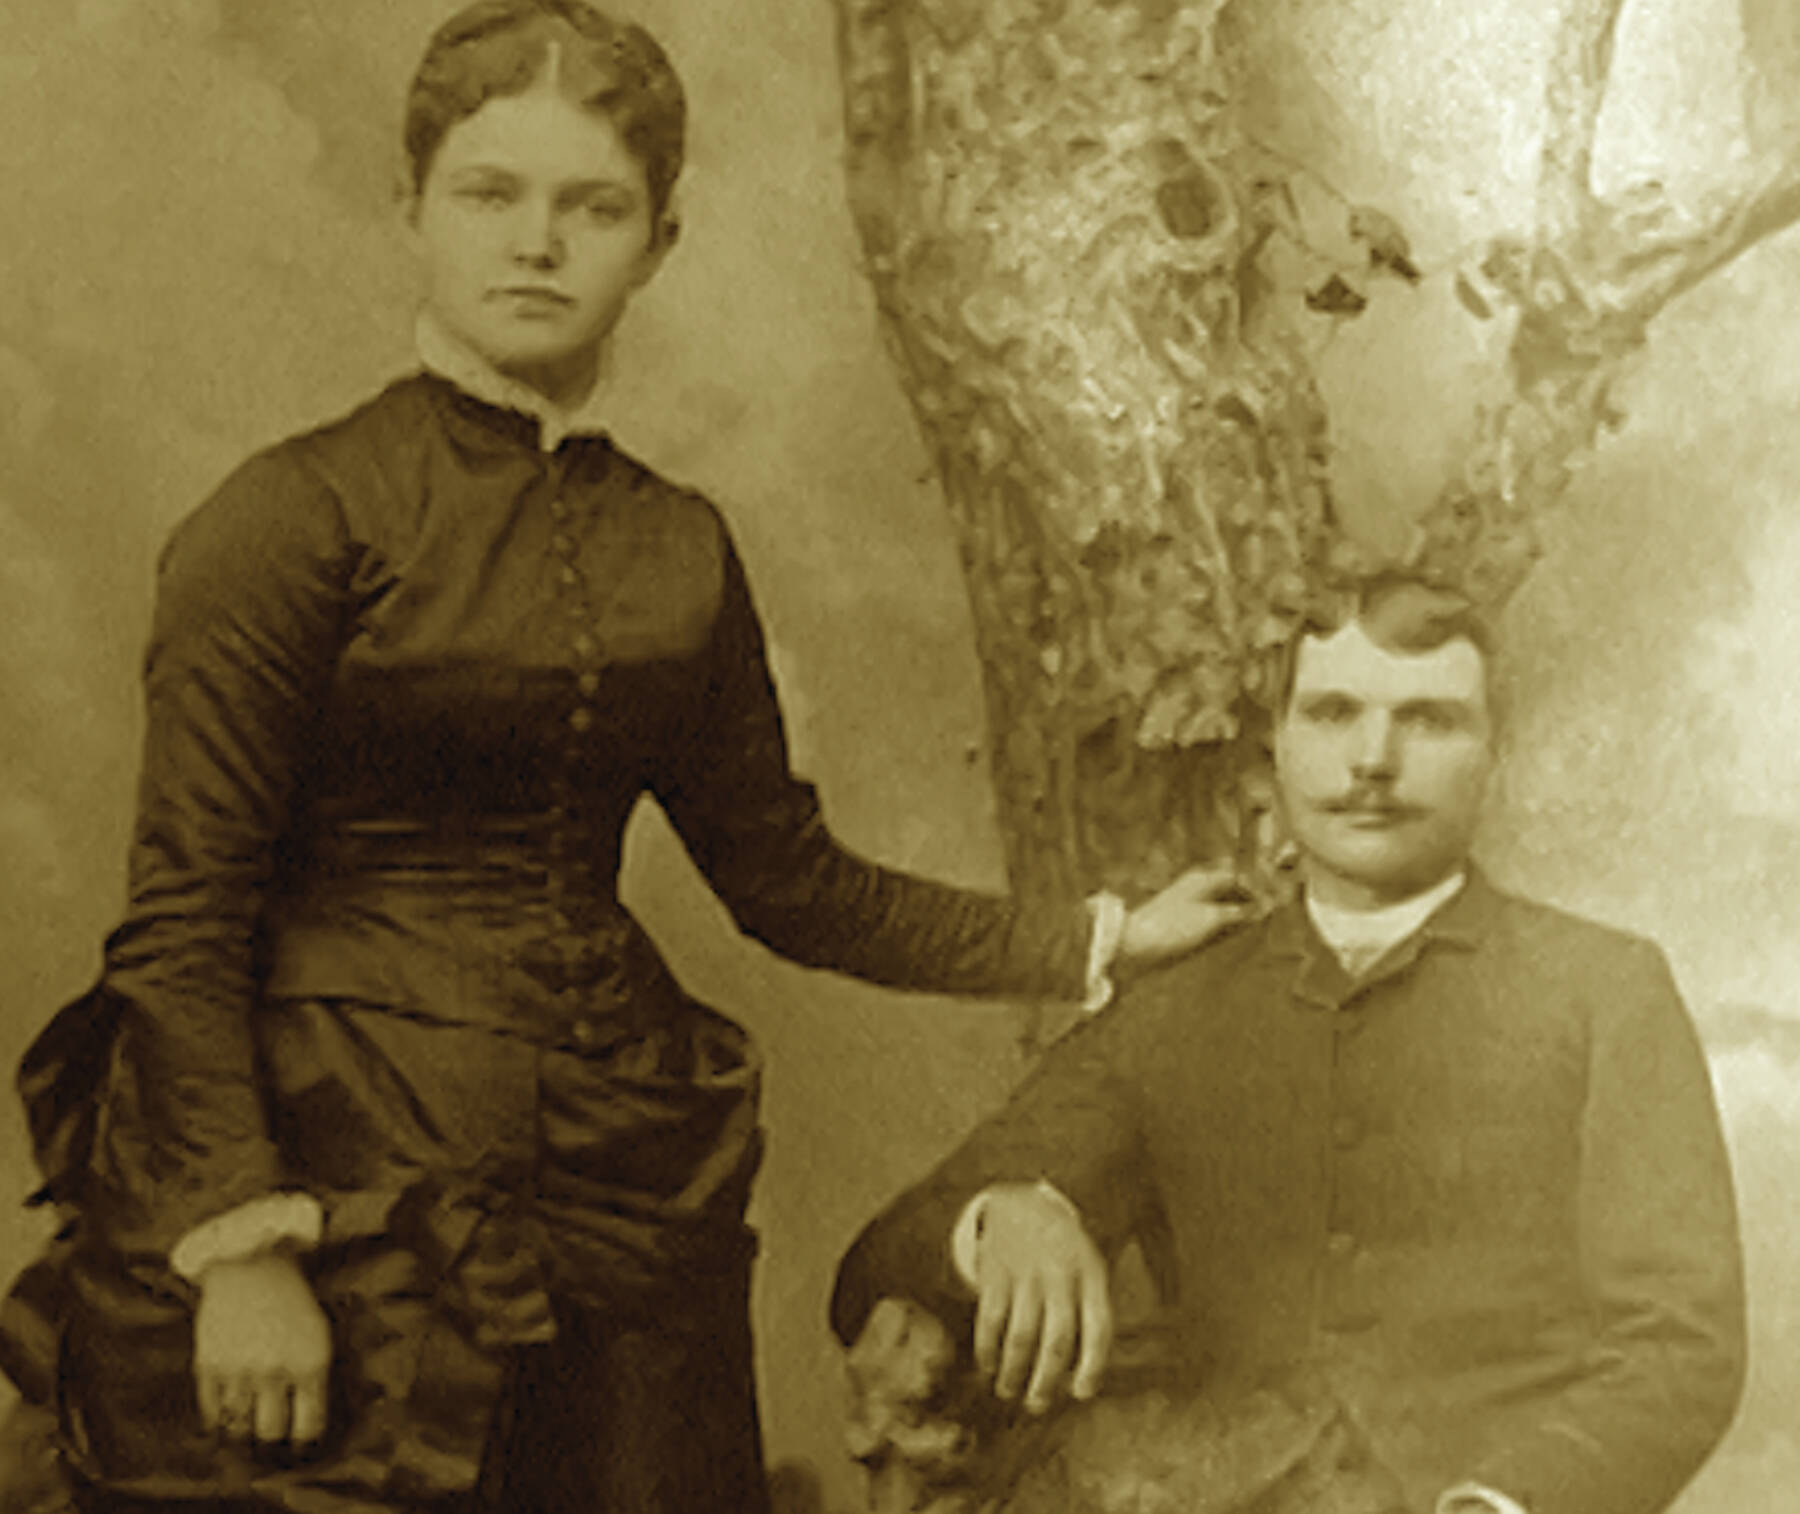 Author Brian George Smith’s great-grandmother, Ida Mae, and her husband Will are the inspiration behind Smith’s novels, “Ida Mae Joy” and “Pearl,” published in 2021 and 2022 respectively.